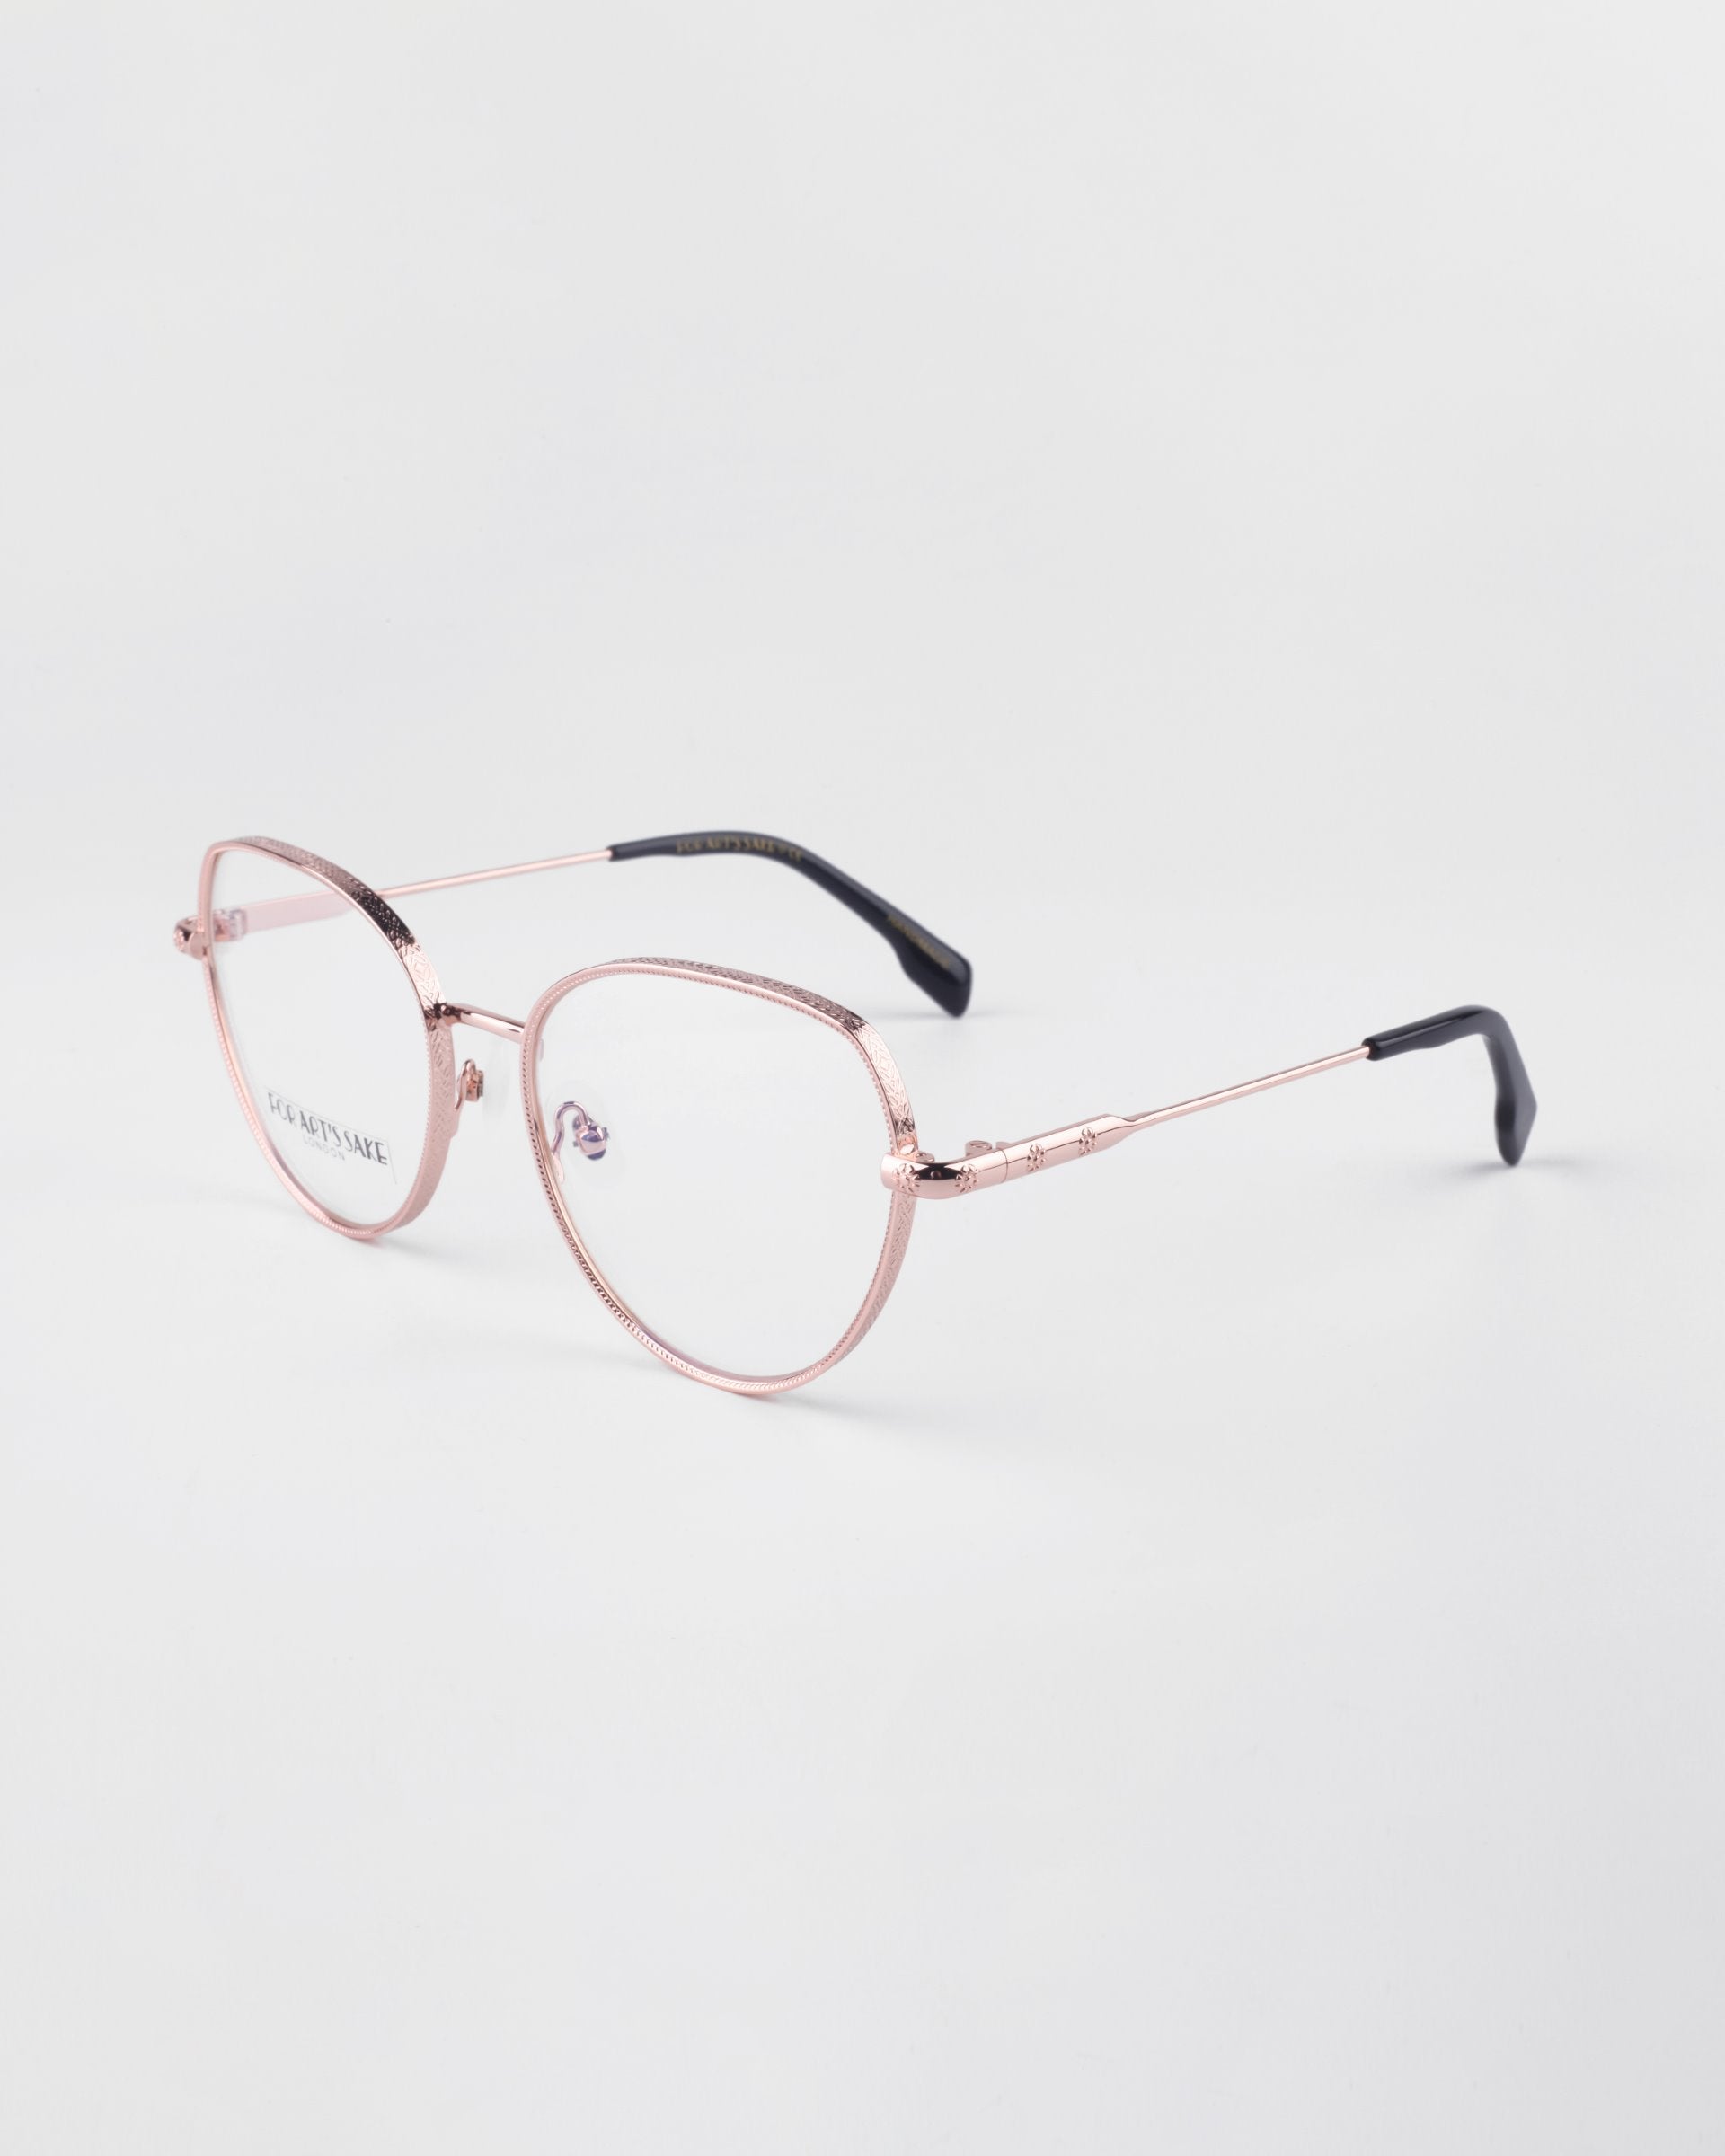 A pair of round, 18-karat gold-plated eyeglasses with a light pink tint. The **Frida Floral** glasses by **For Art&#39;s Sake®** have thin frames with nose pads and black tips at the ends of the temples, featuring blue light filter lenses. They are placed on a simple, white background.